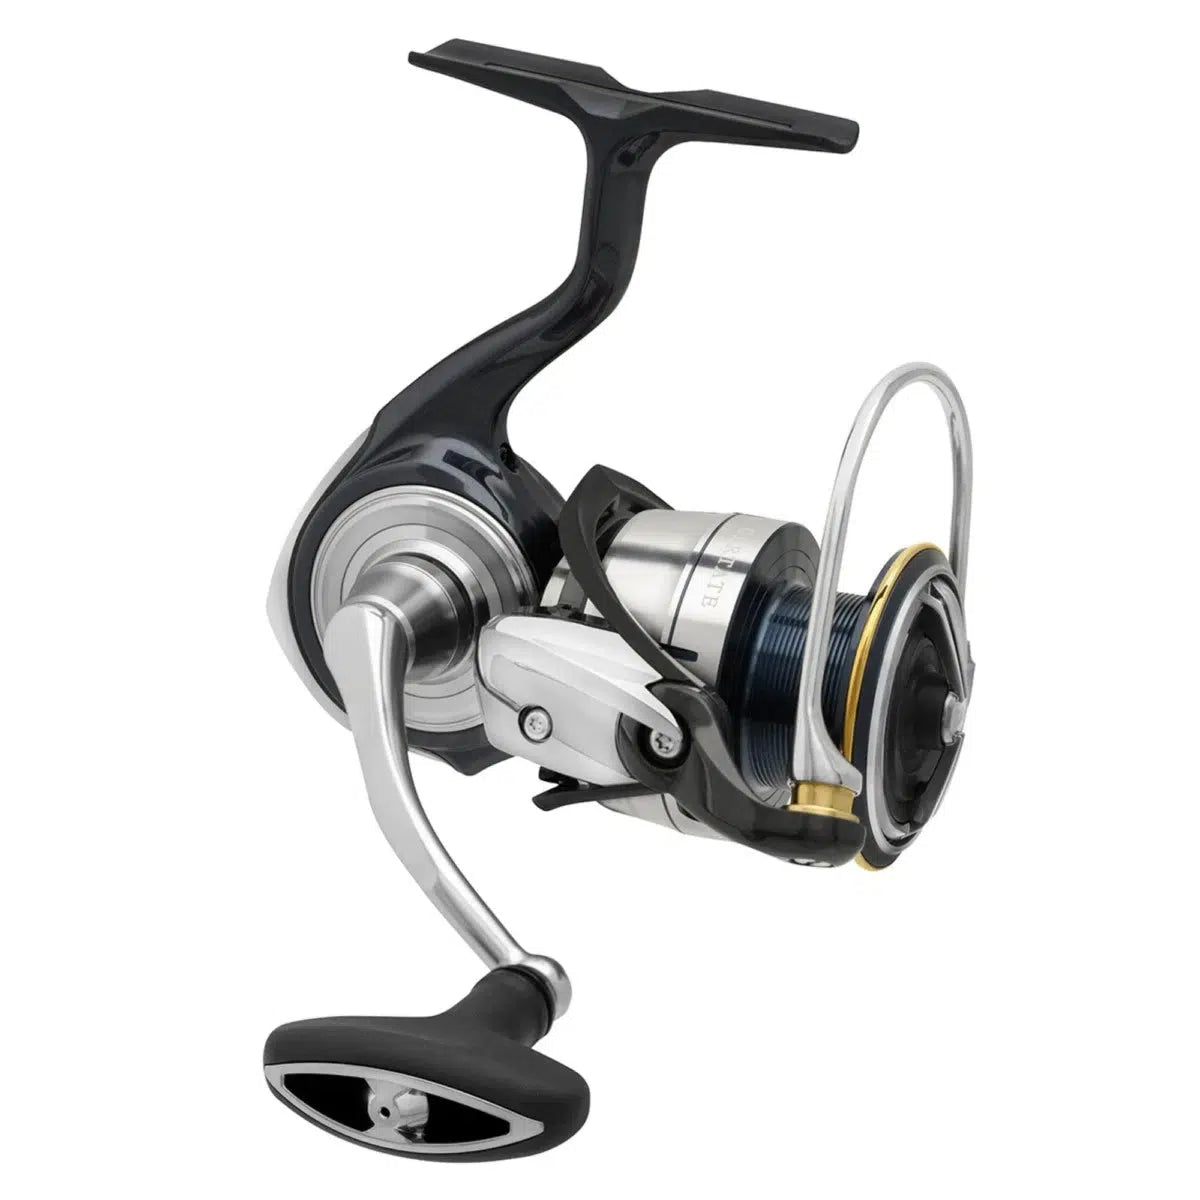 21 PRESSO LT DAIWA Fishing Shopping - The portal for fishing tailored for  you